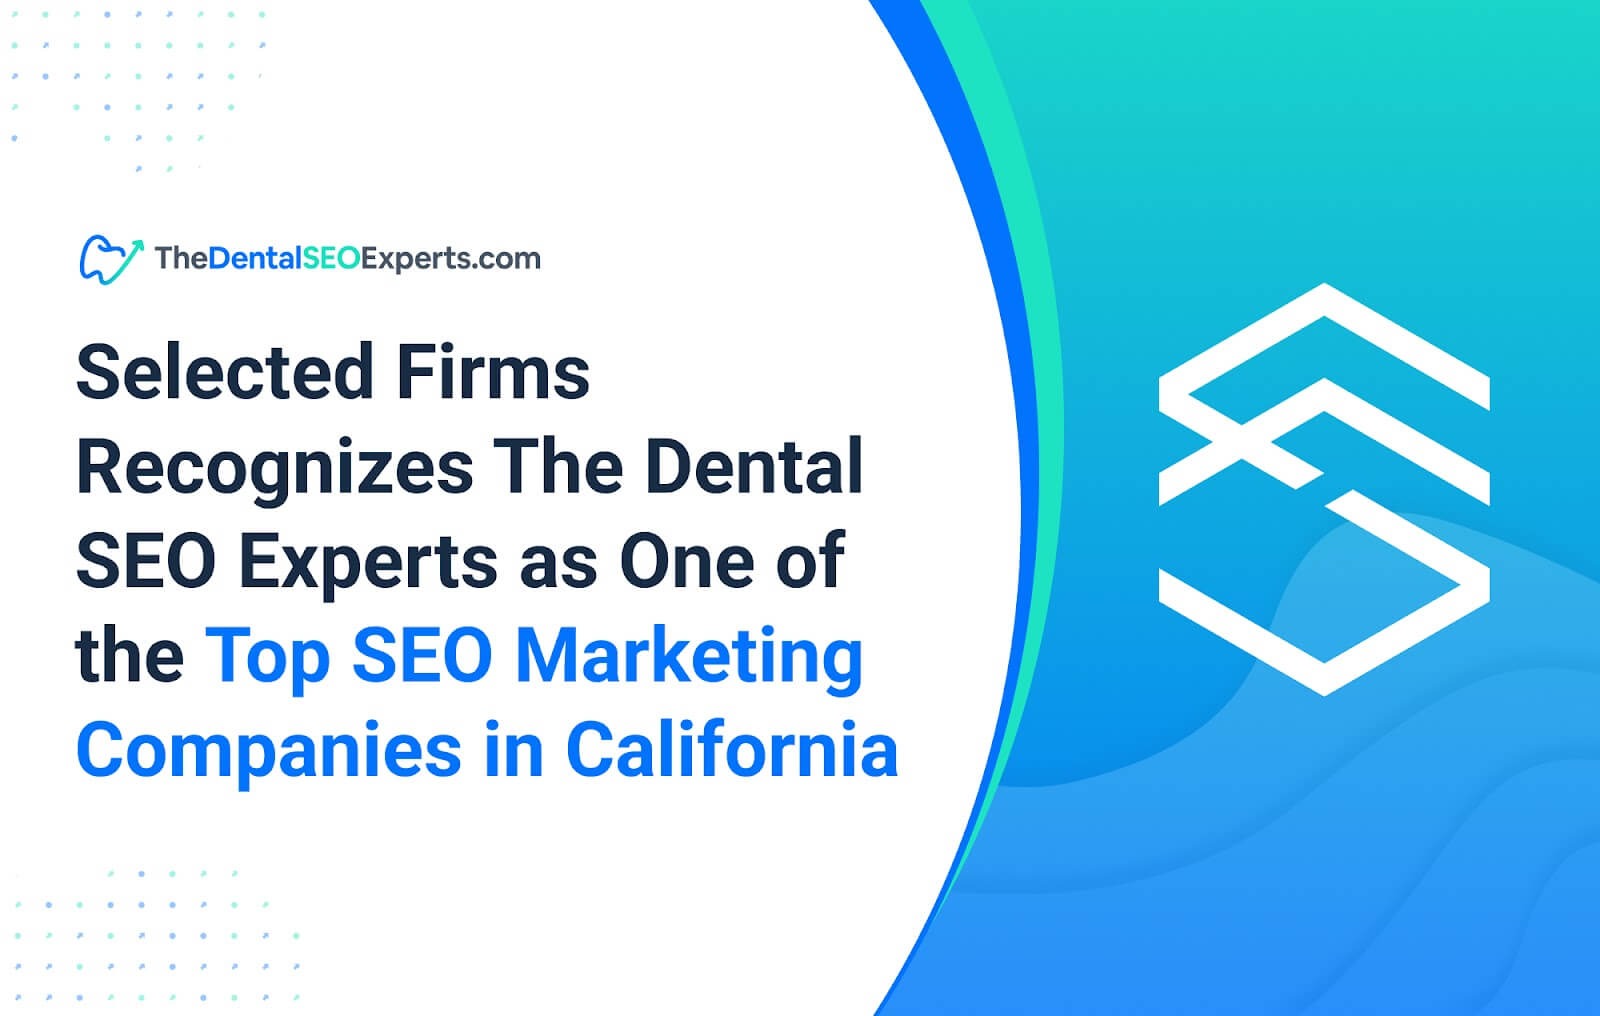 Selected Firms Recognizes The Dental SEO Experts as One of the Top SEO Marketing Companies in California